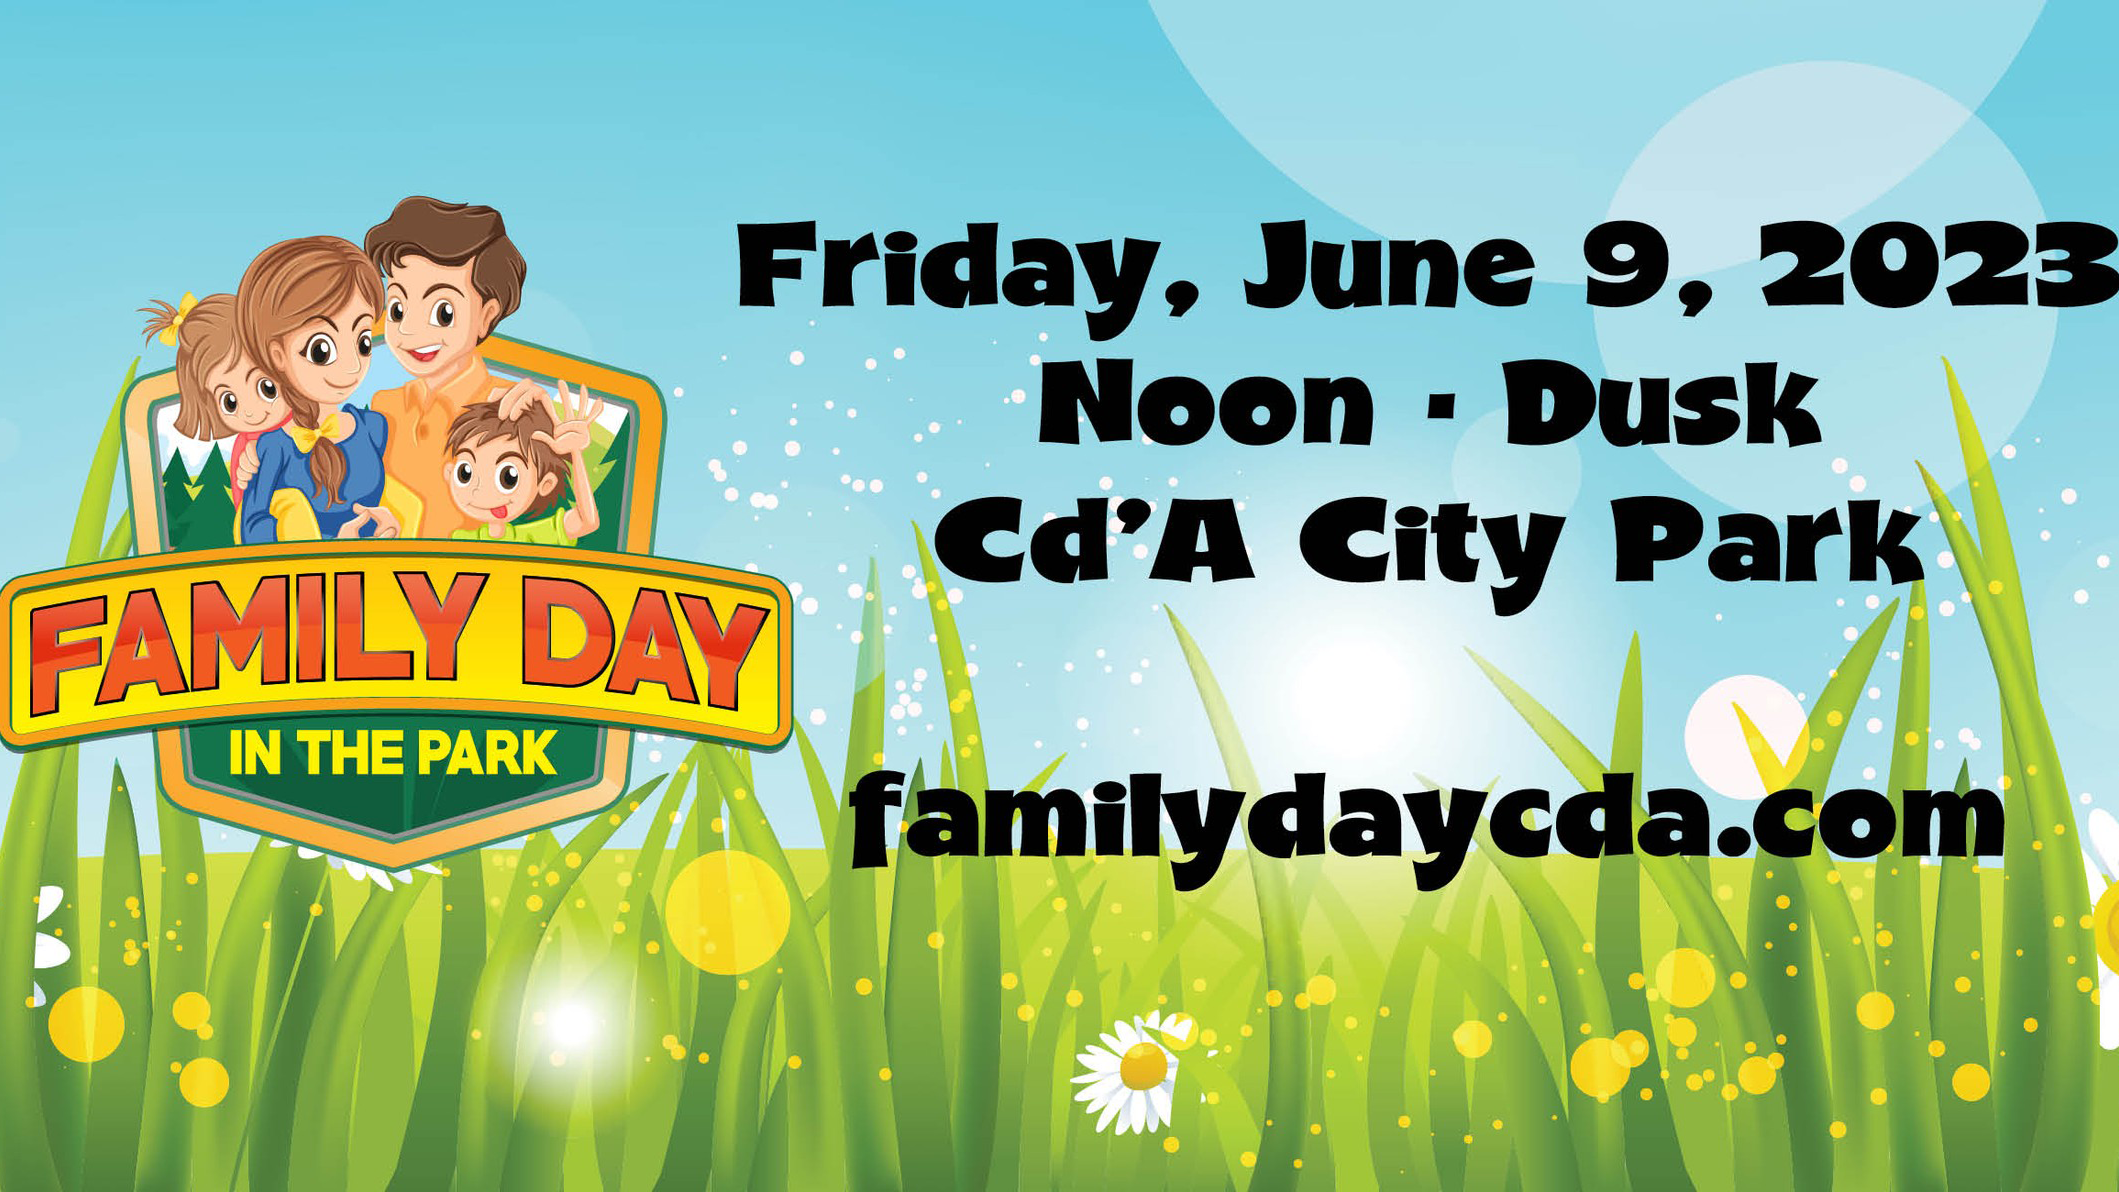 Family Day in the Park - Friday, June 9 at CDA City Park. 